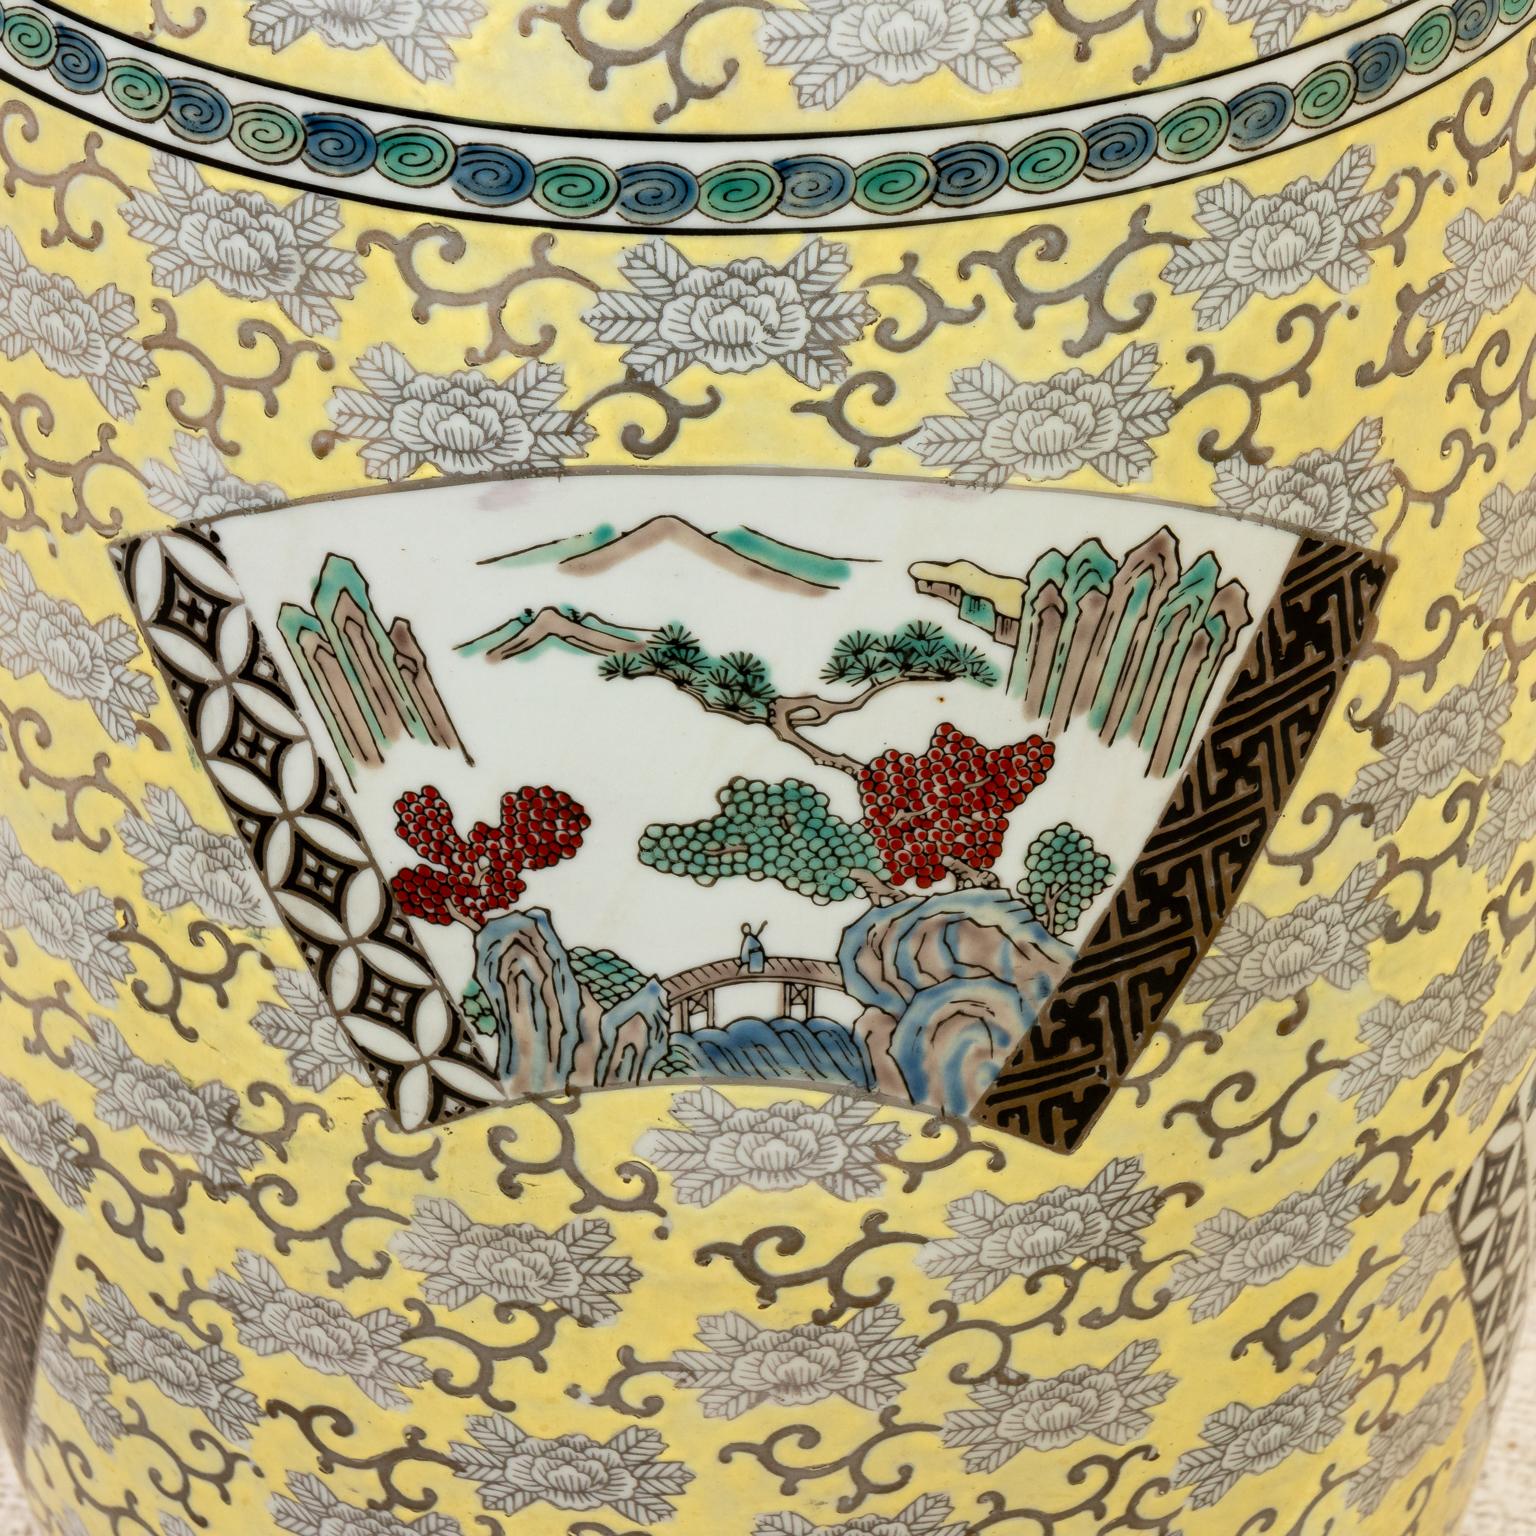 Circa 20th century decorative hand painted Chinese porcelain garden stool or side table with double handles. The piece features a multicolor bird, landscape, and floral motifs on yellow ground. Markings on the base are 